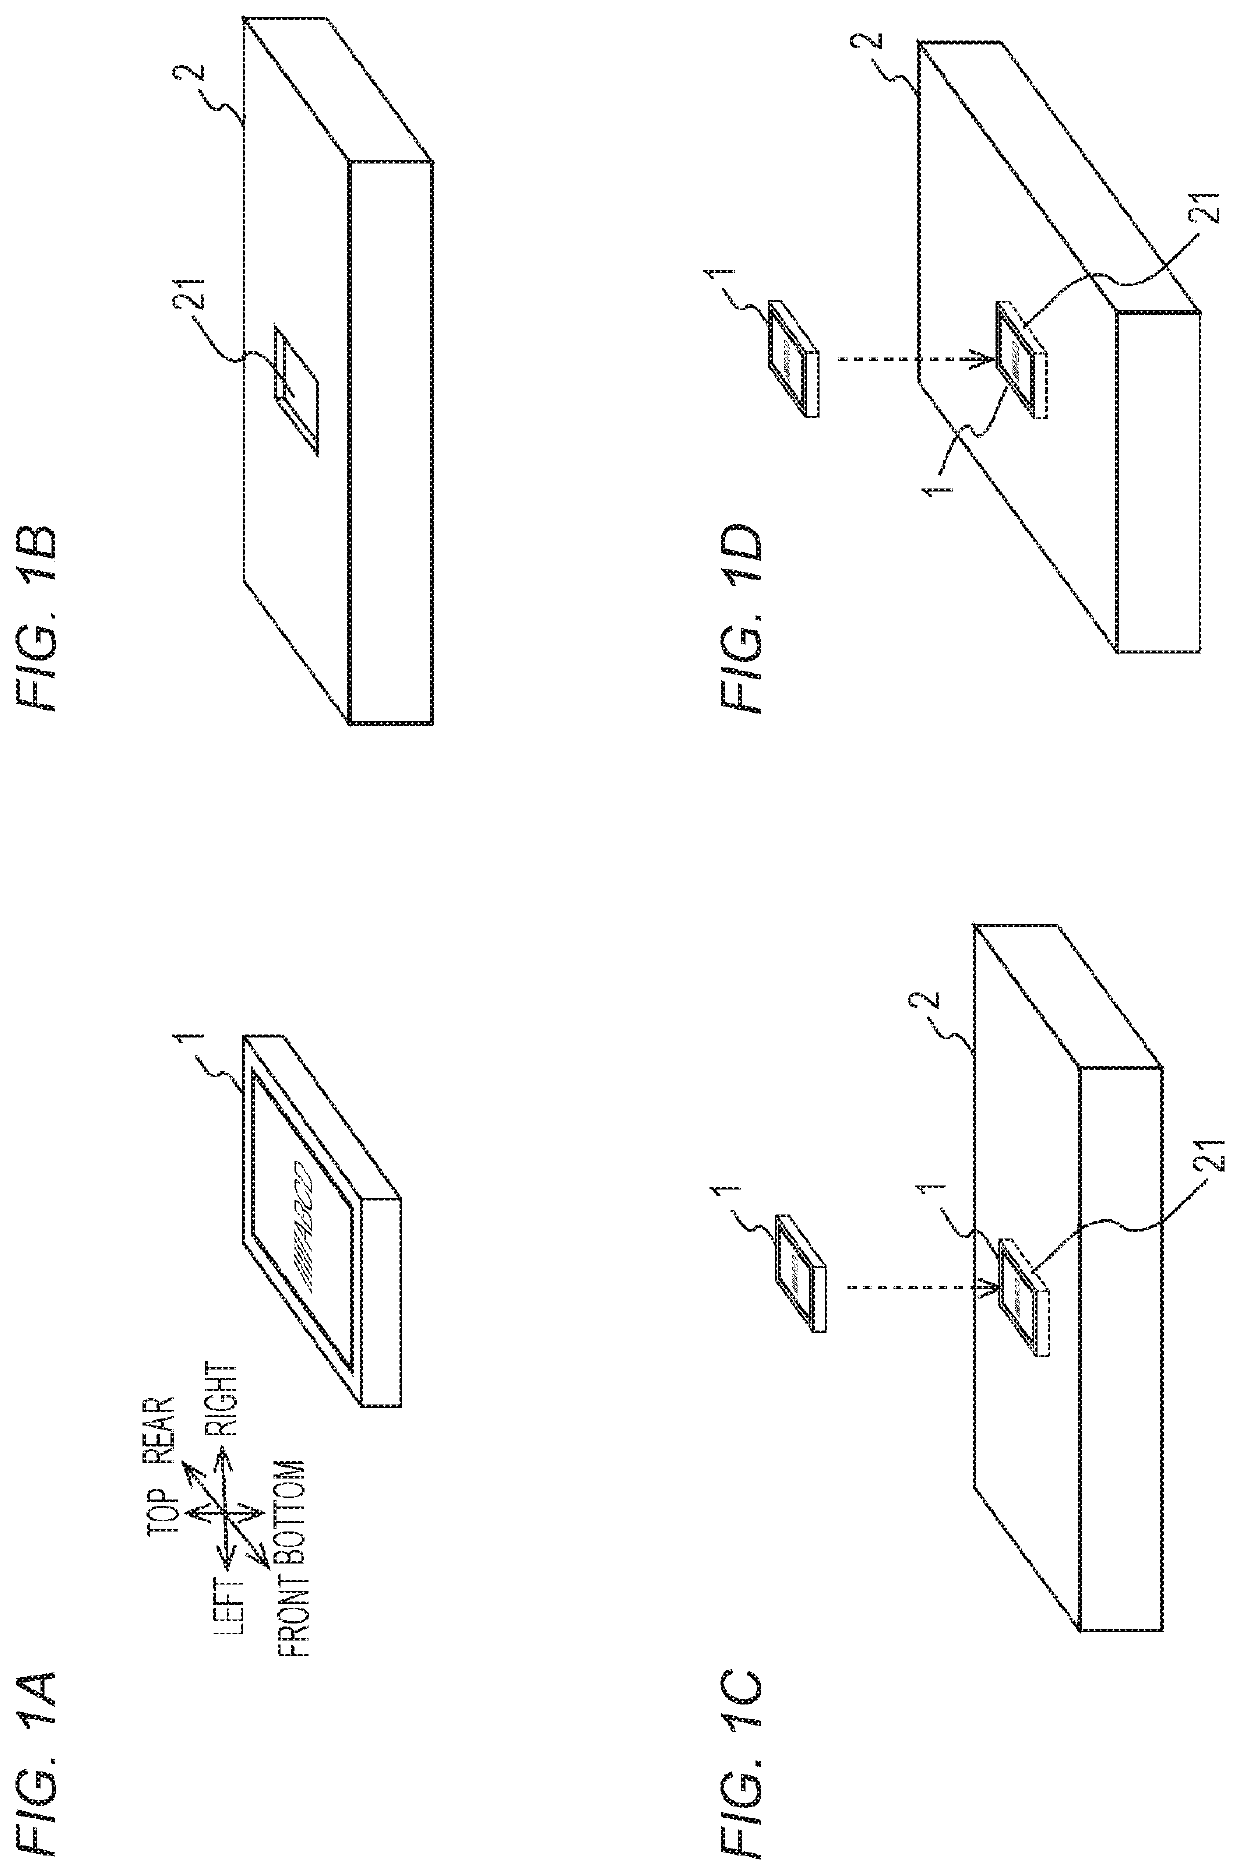 Equipment, display-object component, and display-object fixing method